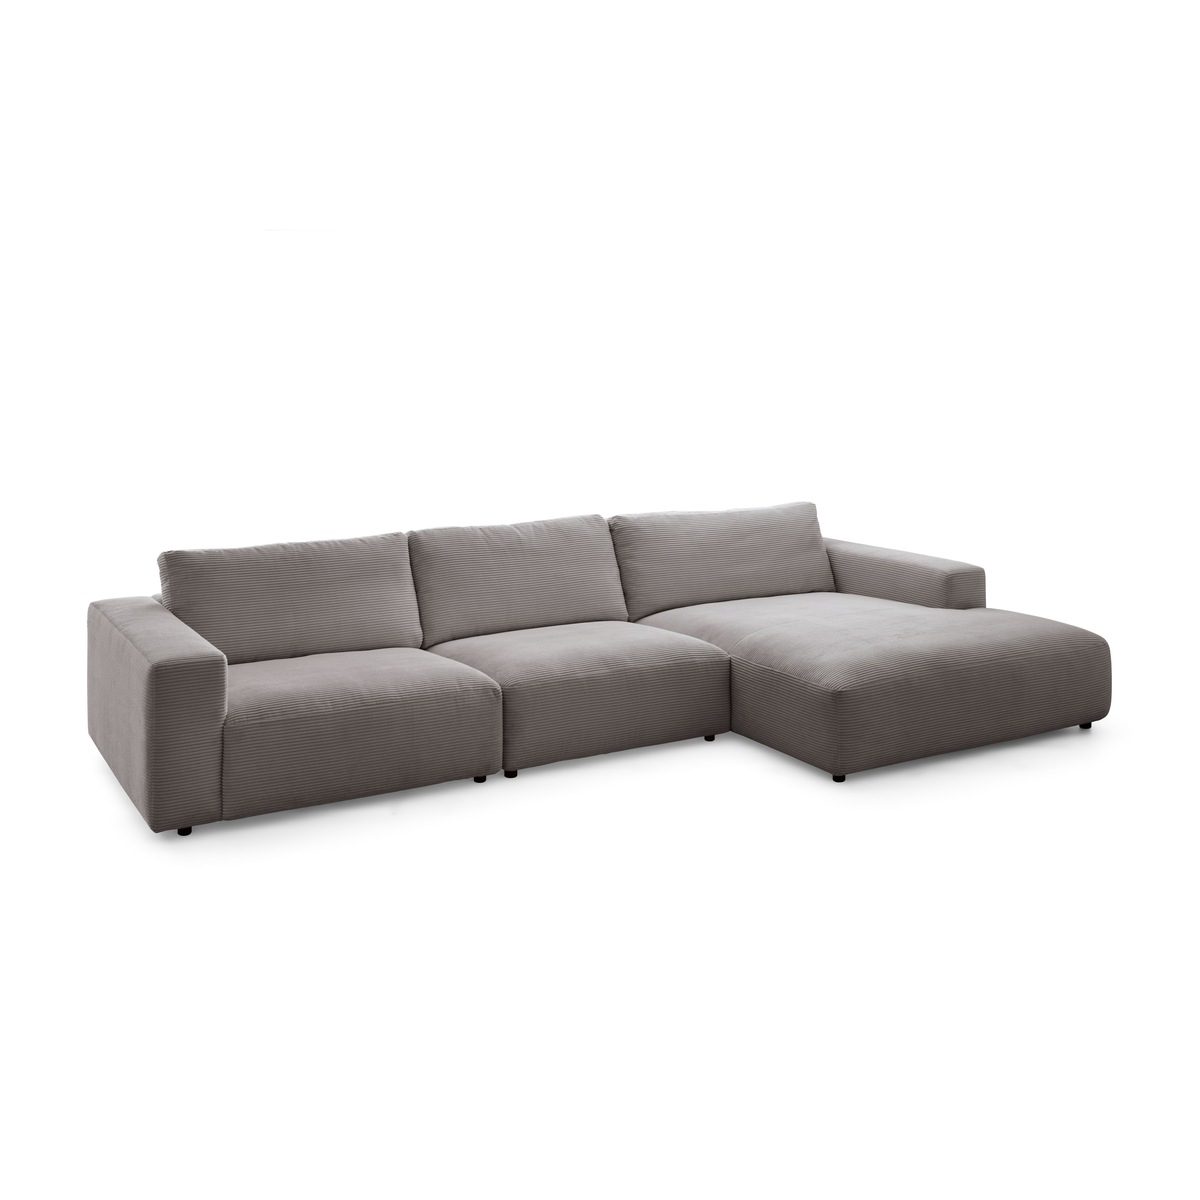 branded Gallery Sofa Lucia M Musterring Sitzer by Cord 3,5